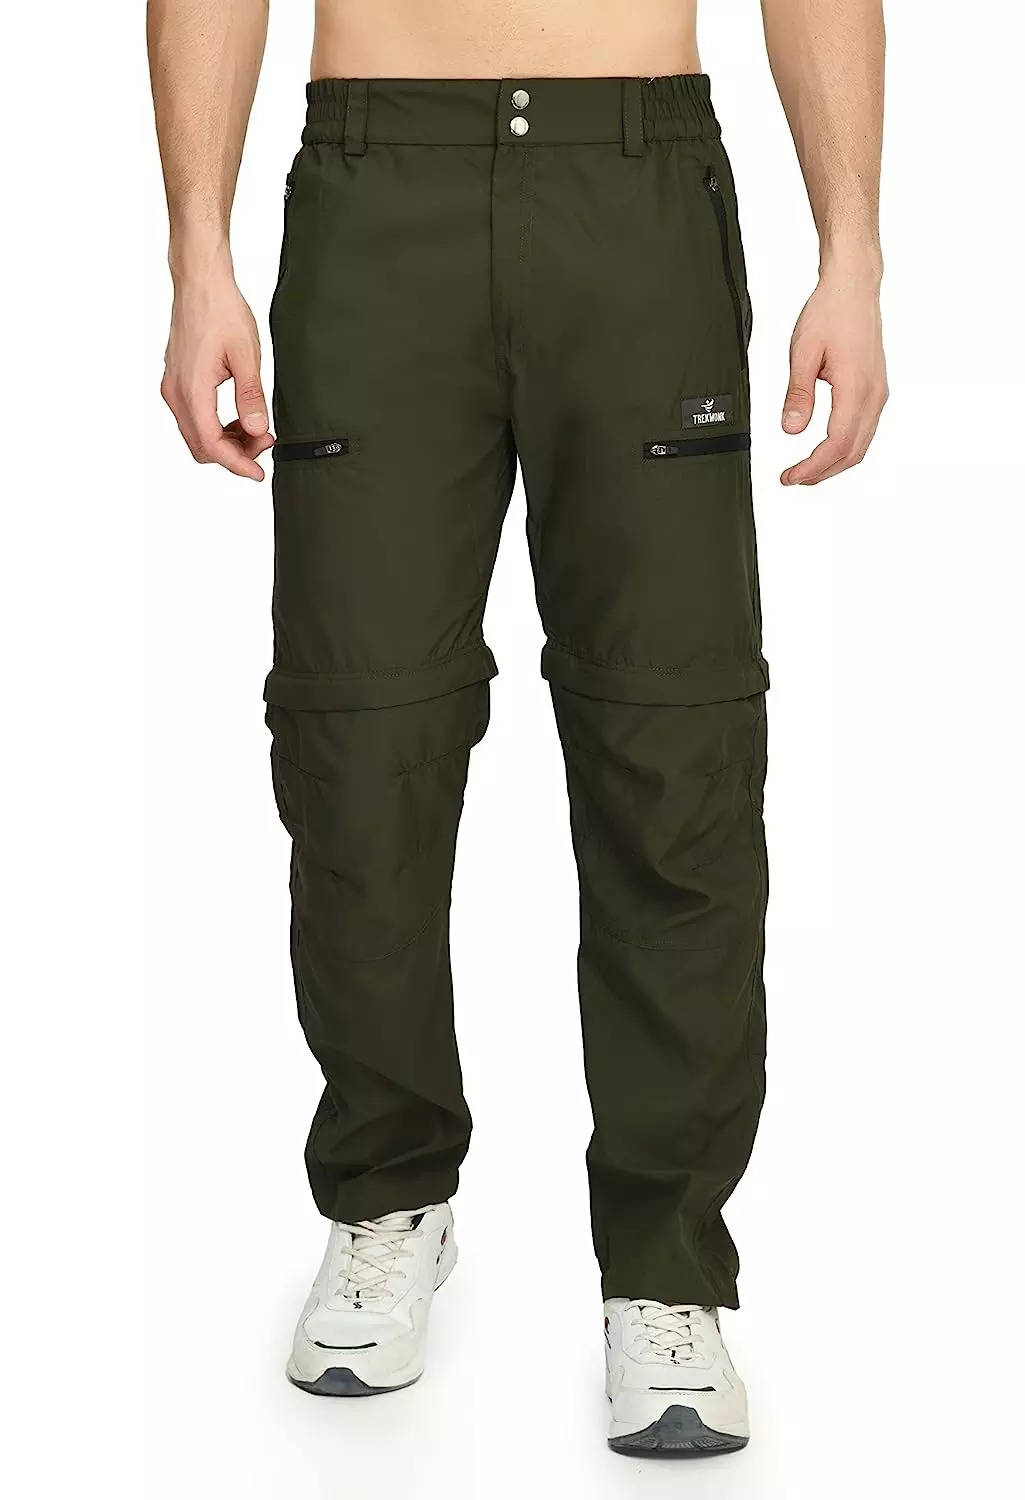 Six Pocket Cargo Pants: Best Six Pocket Cargo Pants in India for Your ...